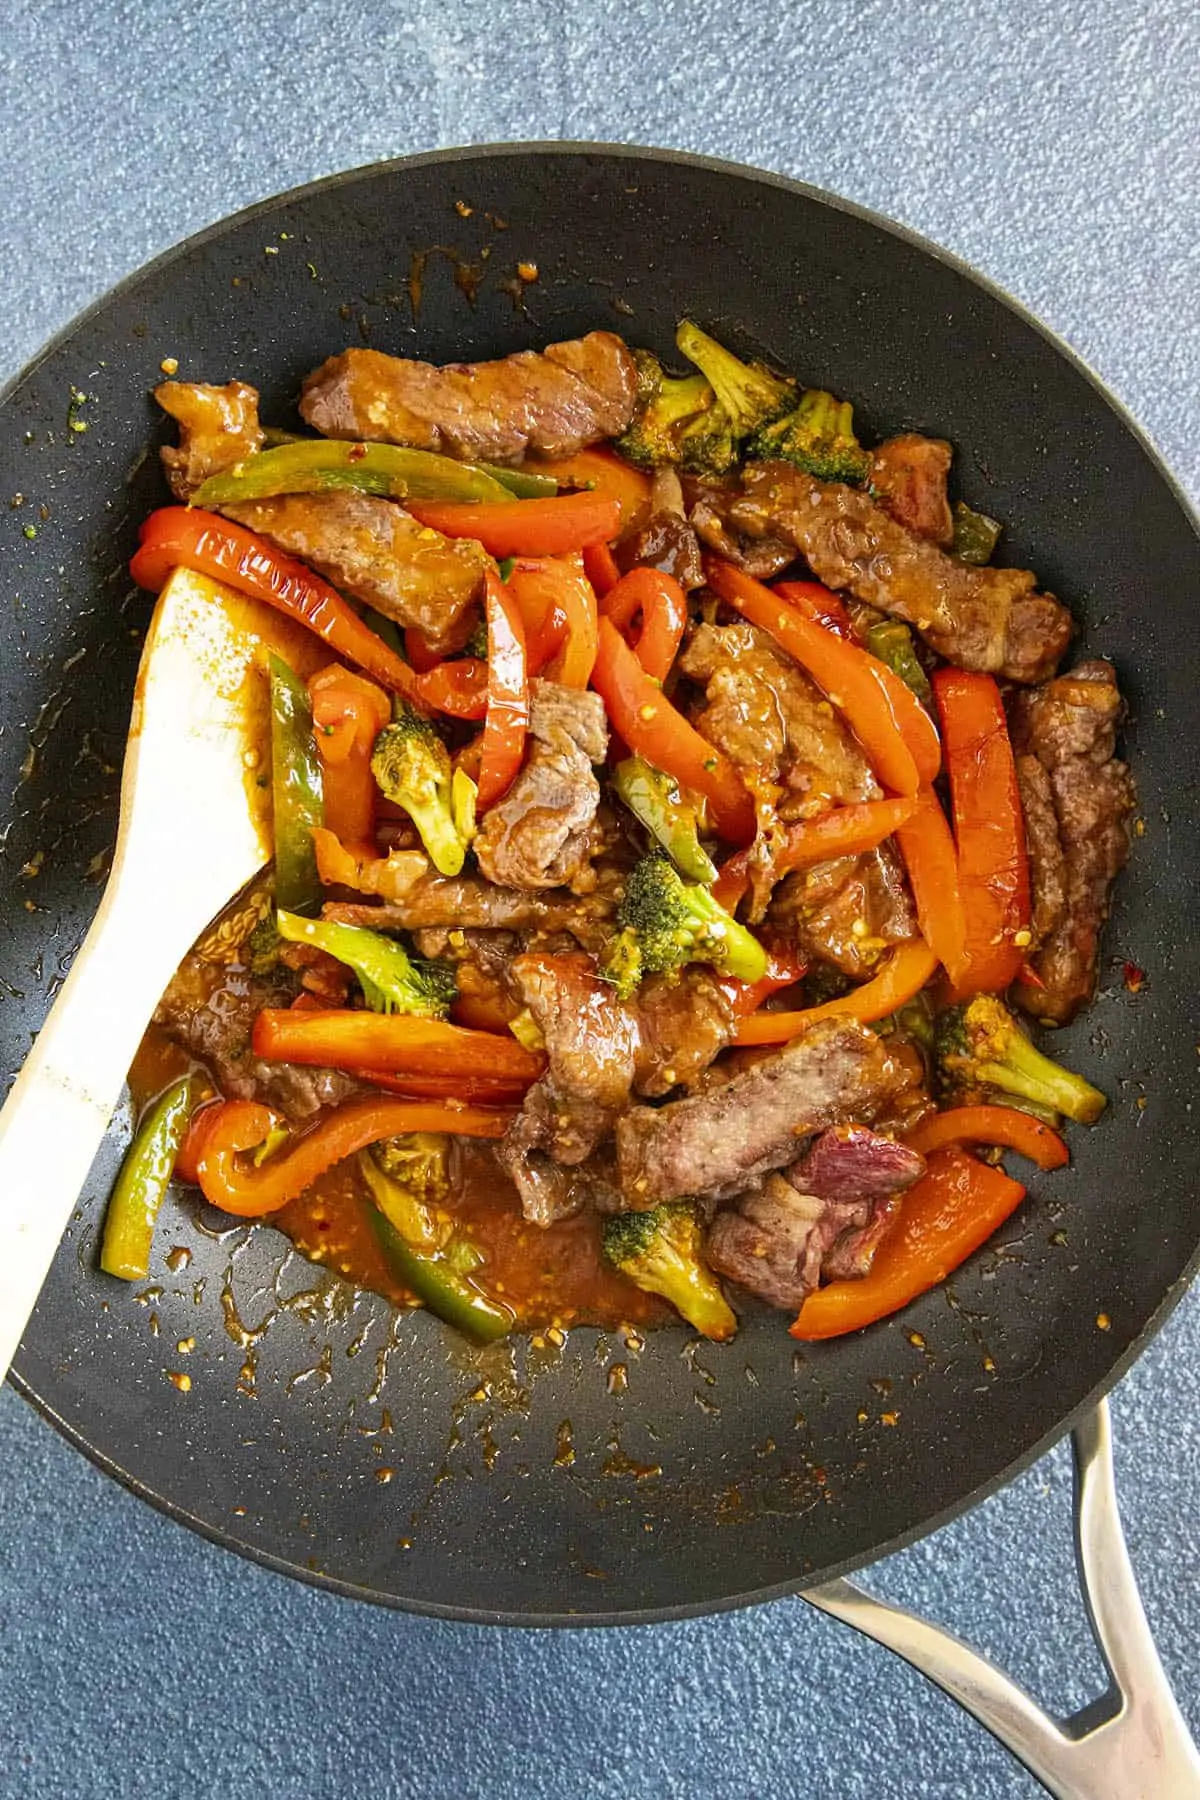 Stirring the peppers and broccoli into the pan with the seared beef